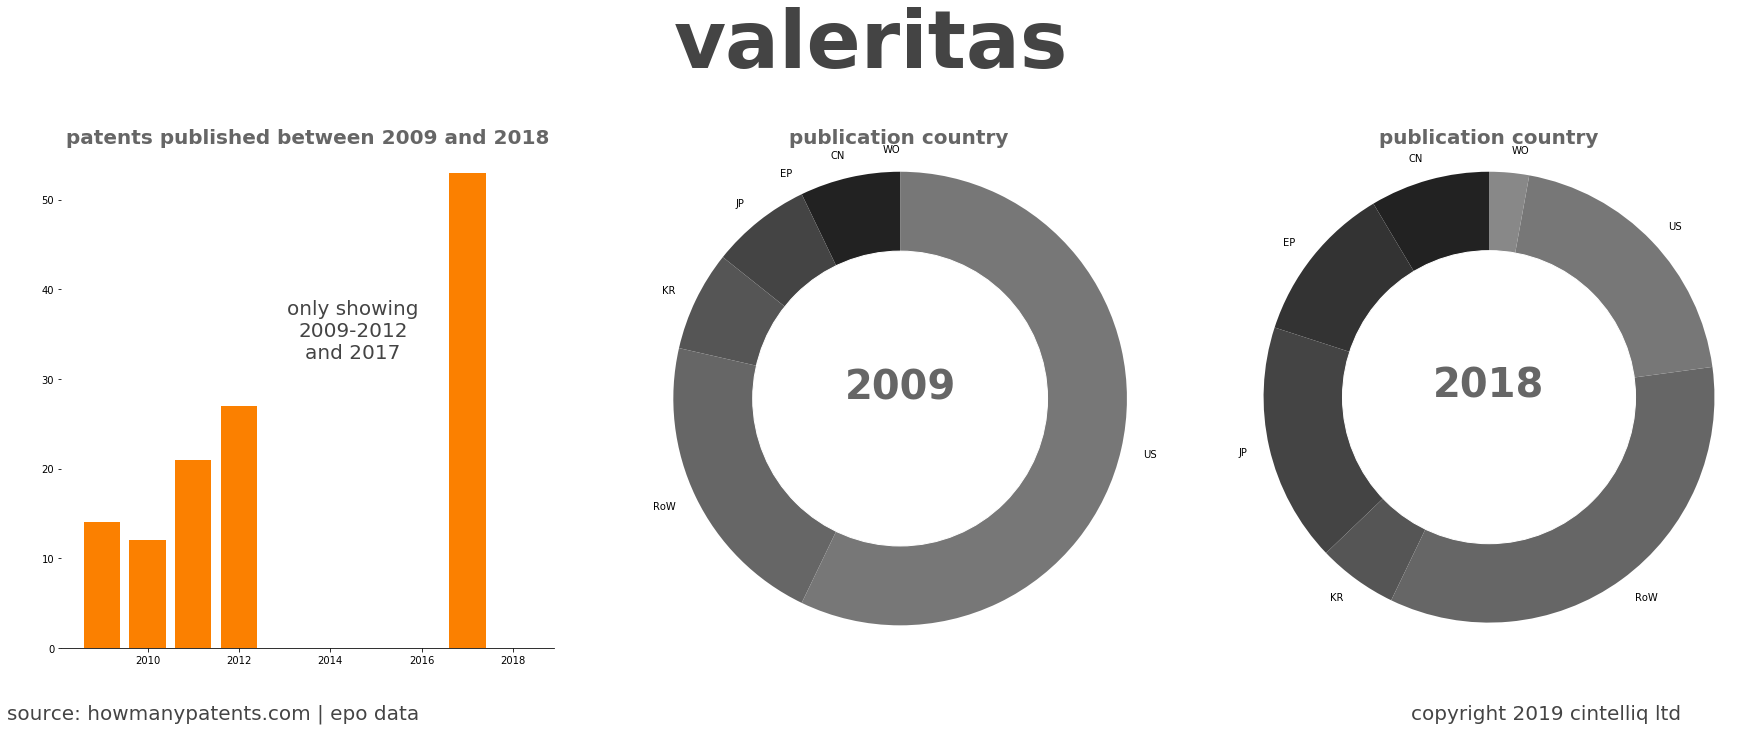 summary of patents for Valeritas